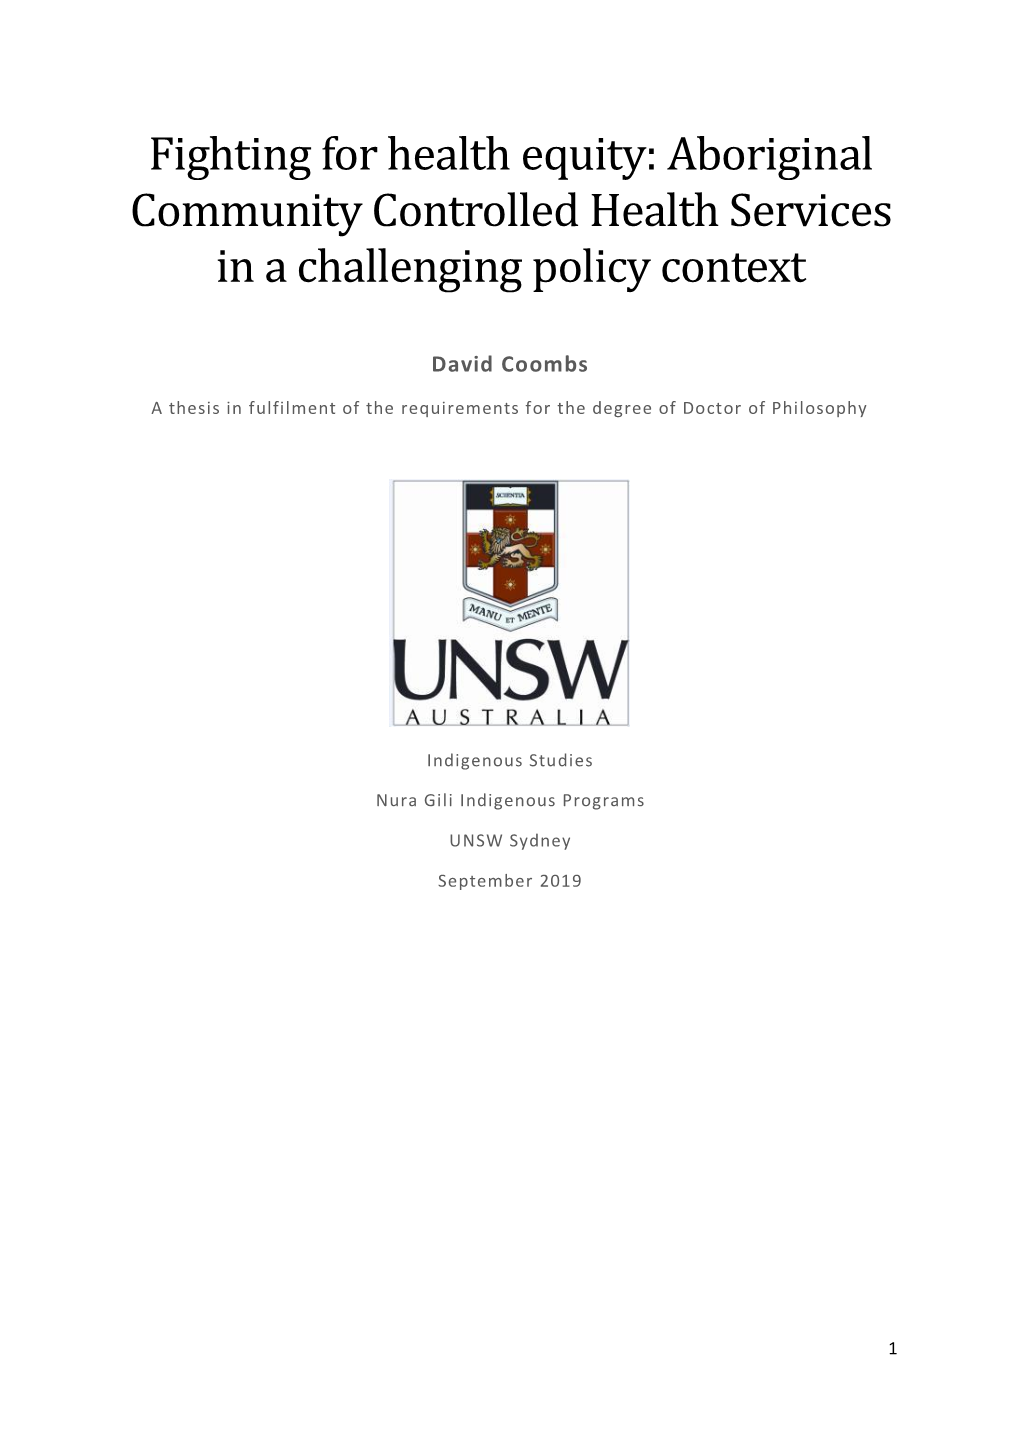 Aboriginal Community Controlled Health Services in a Challenging Policy Context